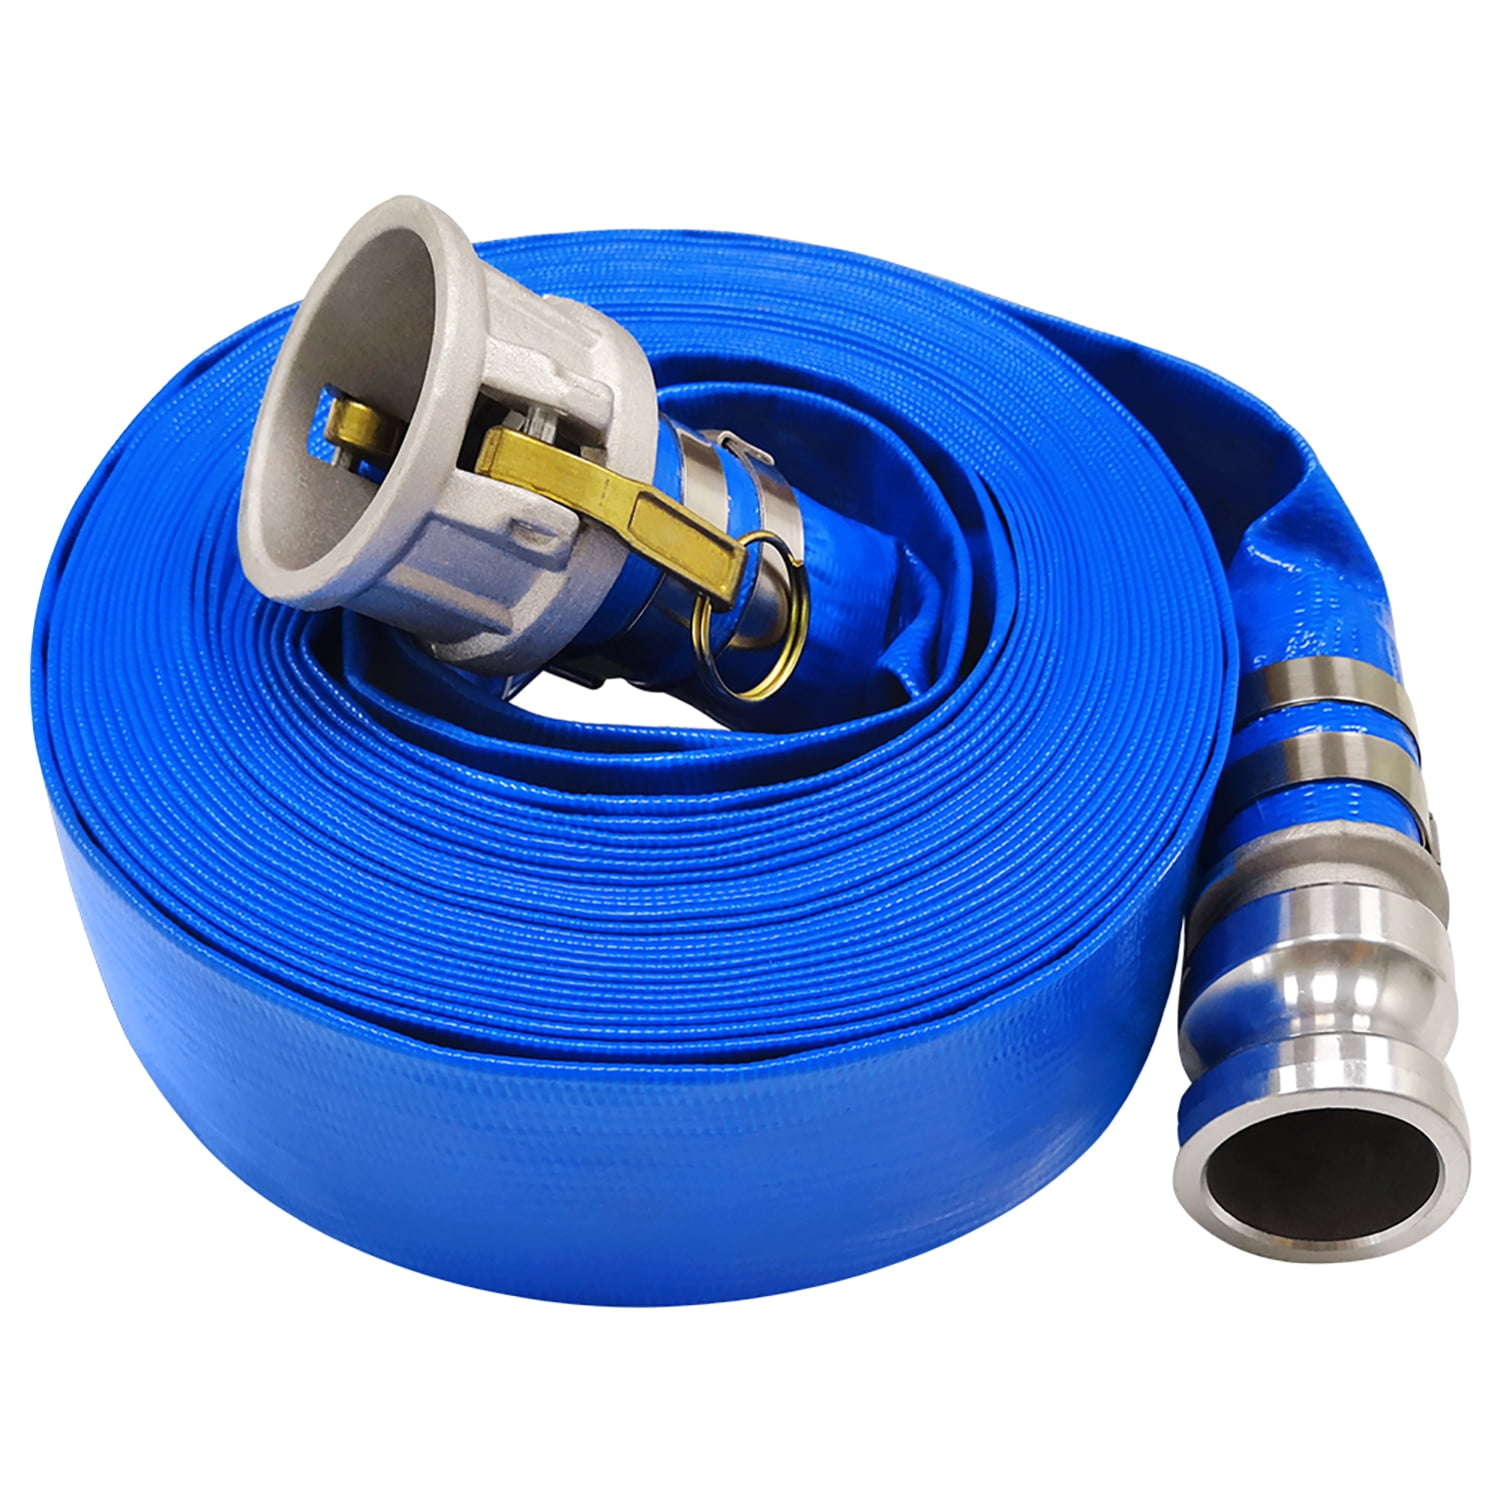 4" inch water pump hose discharge NPT threaded New 25' ft feet foot lay flat 